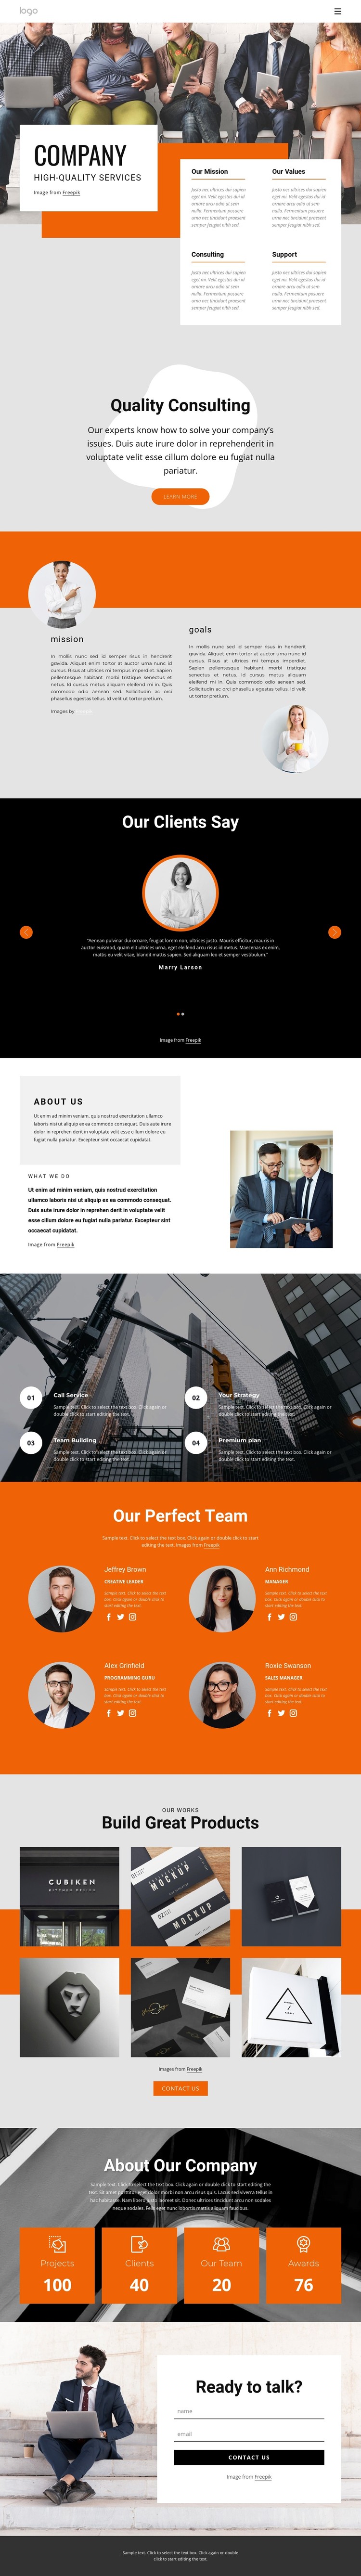 Hight quality consulting firm Static Site Generator